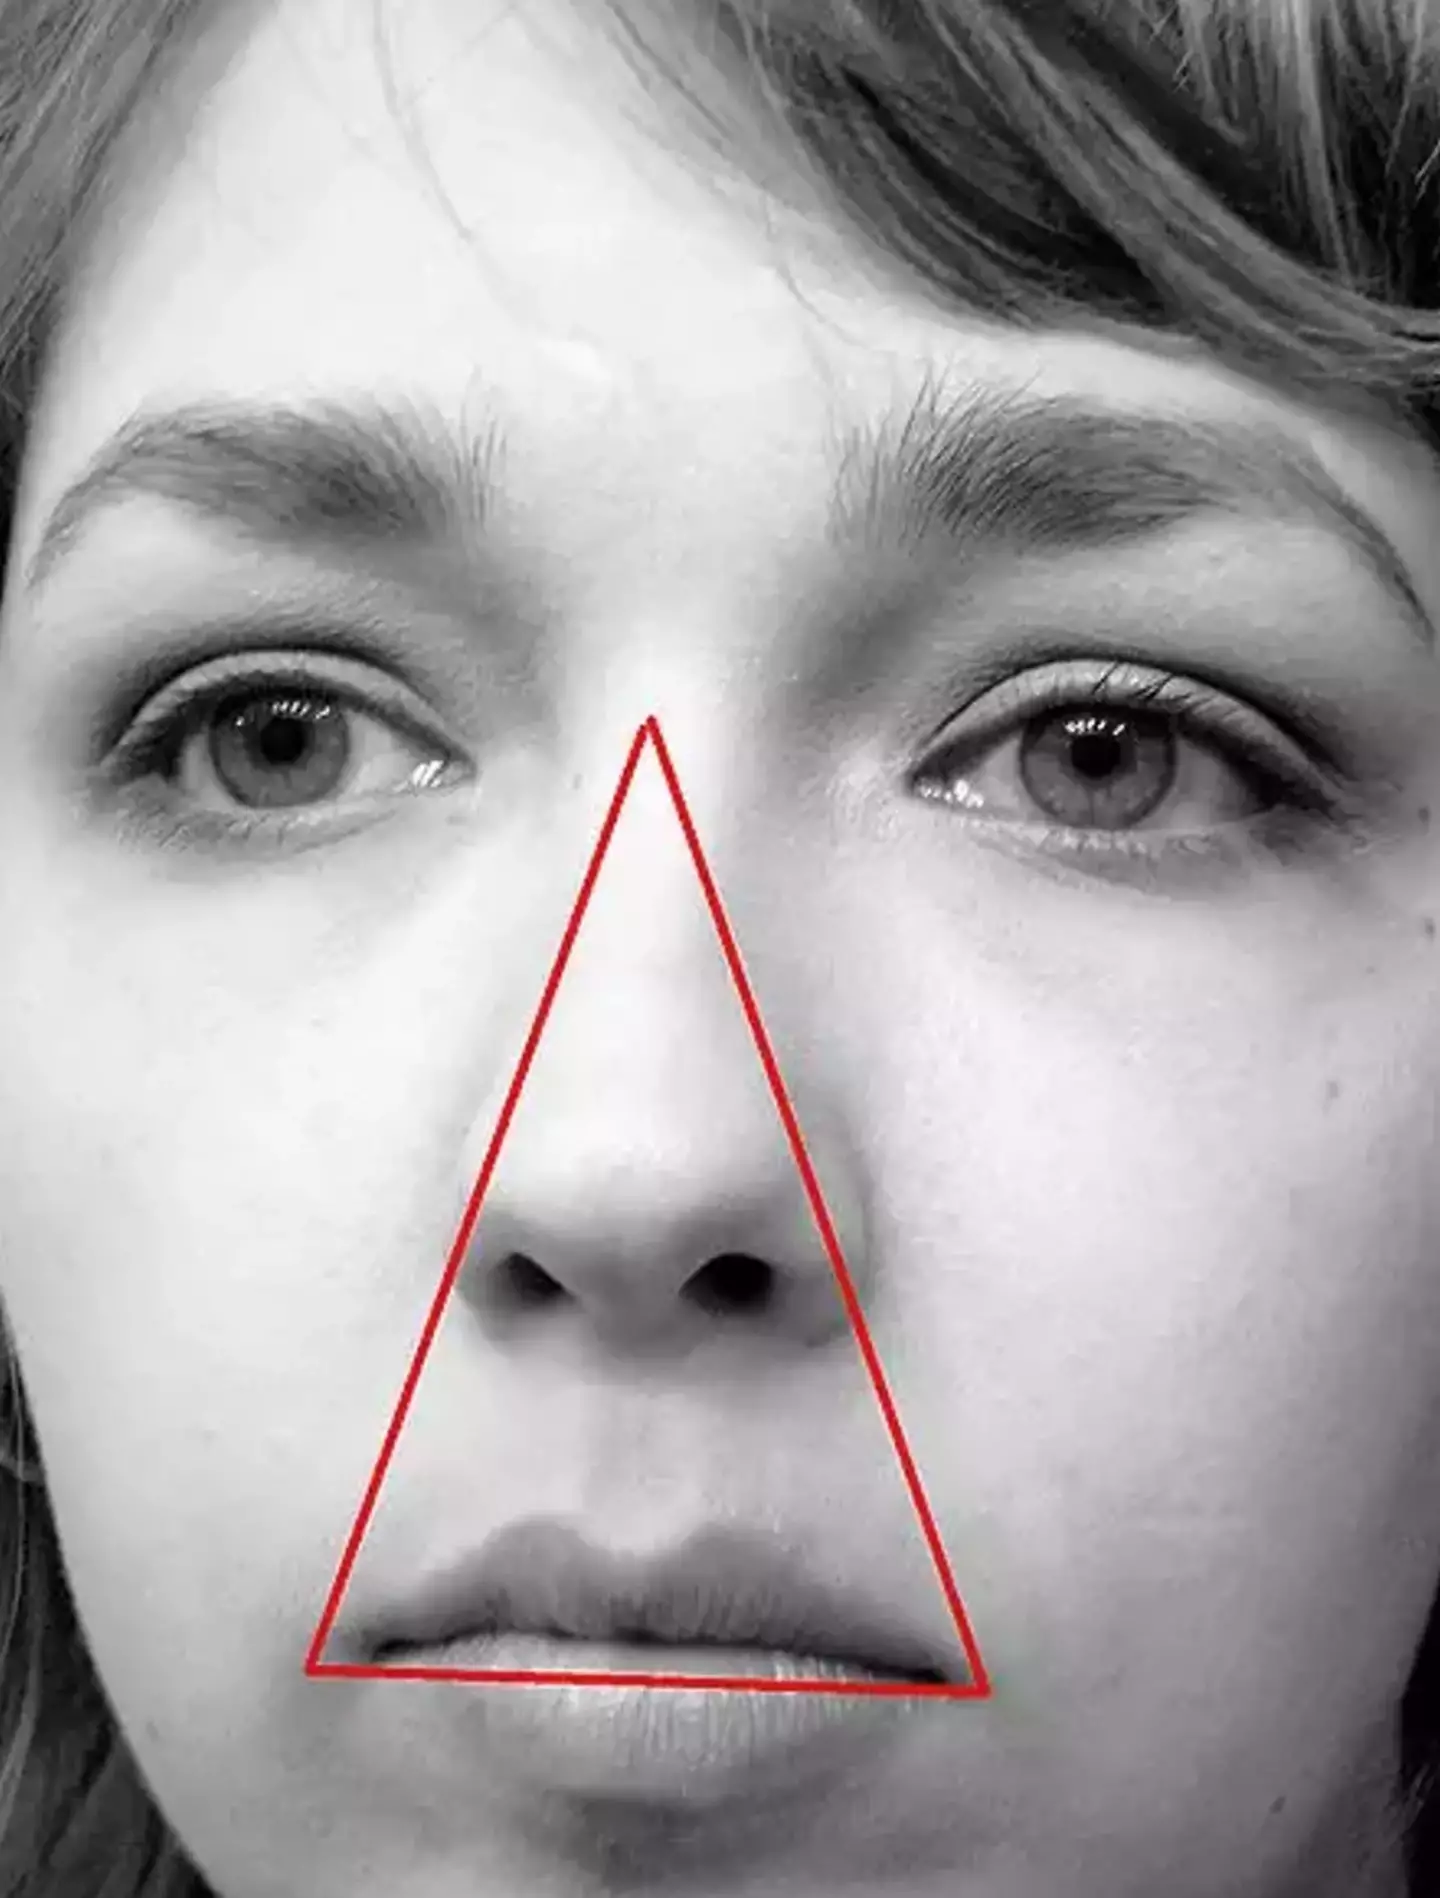 It has been claimed that the triangle is dangerous to mess with.